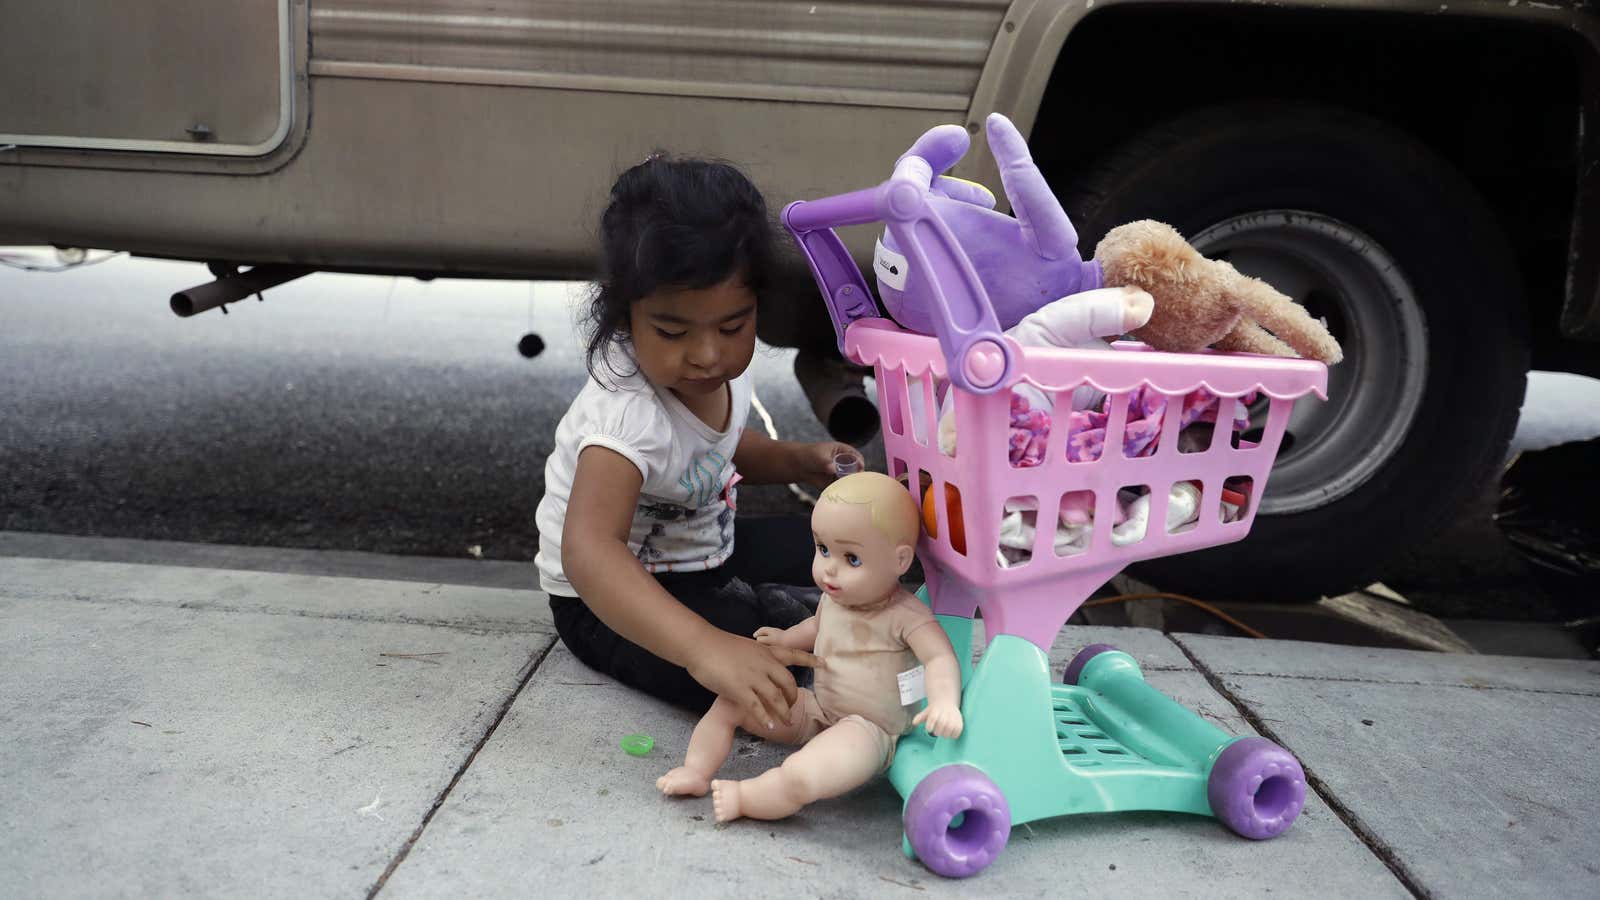 A homeless child plays in Mountain View, California.